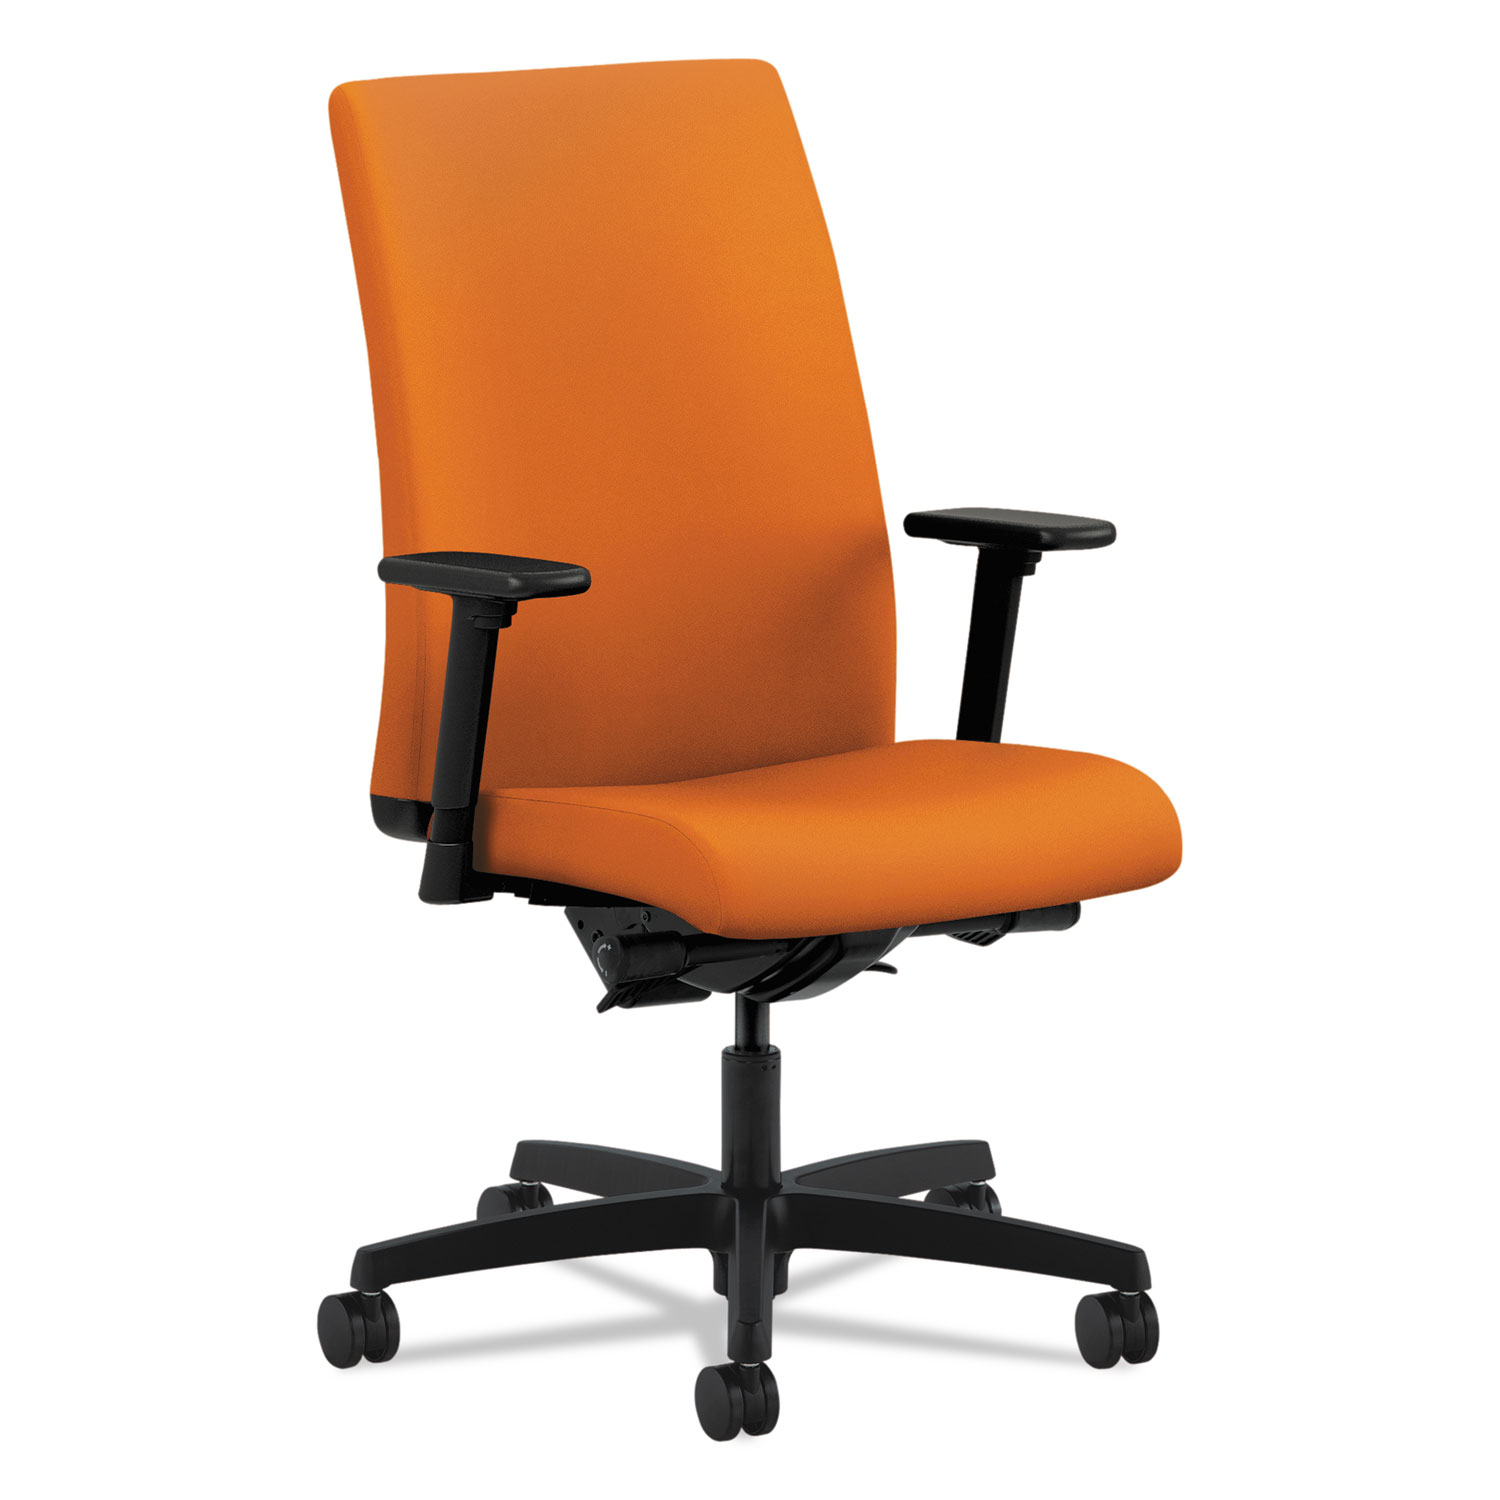  HON HIWM3.A.H.U.CU47.T.SB Ignition Series Mid-Back Work Chair, Supports up to 300 lbs., Apricot Seat/Apricot Back, Black Base (HONIW104CU47) 